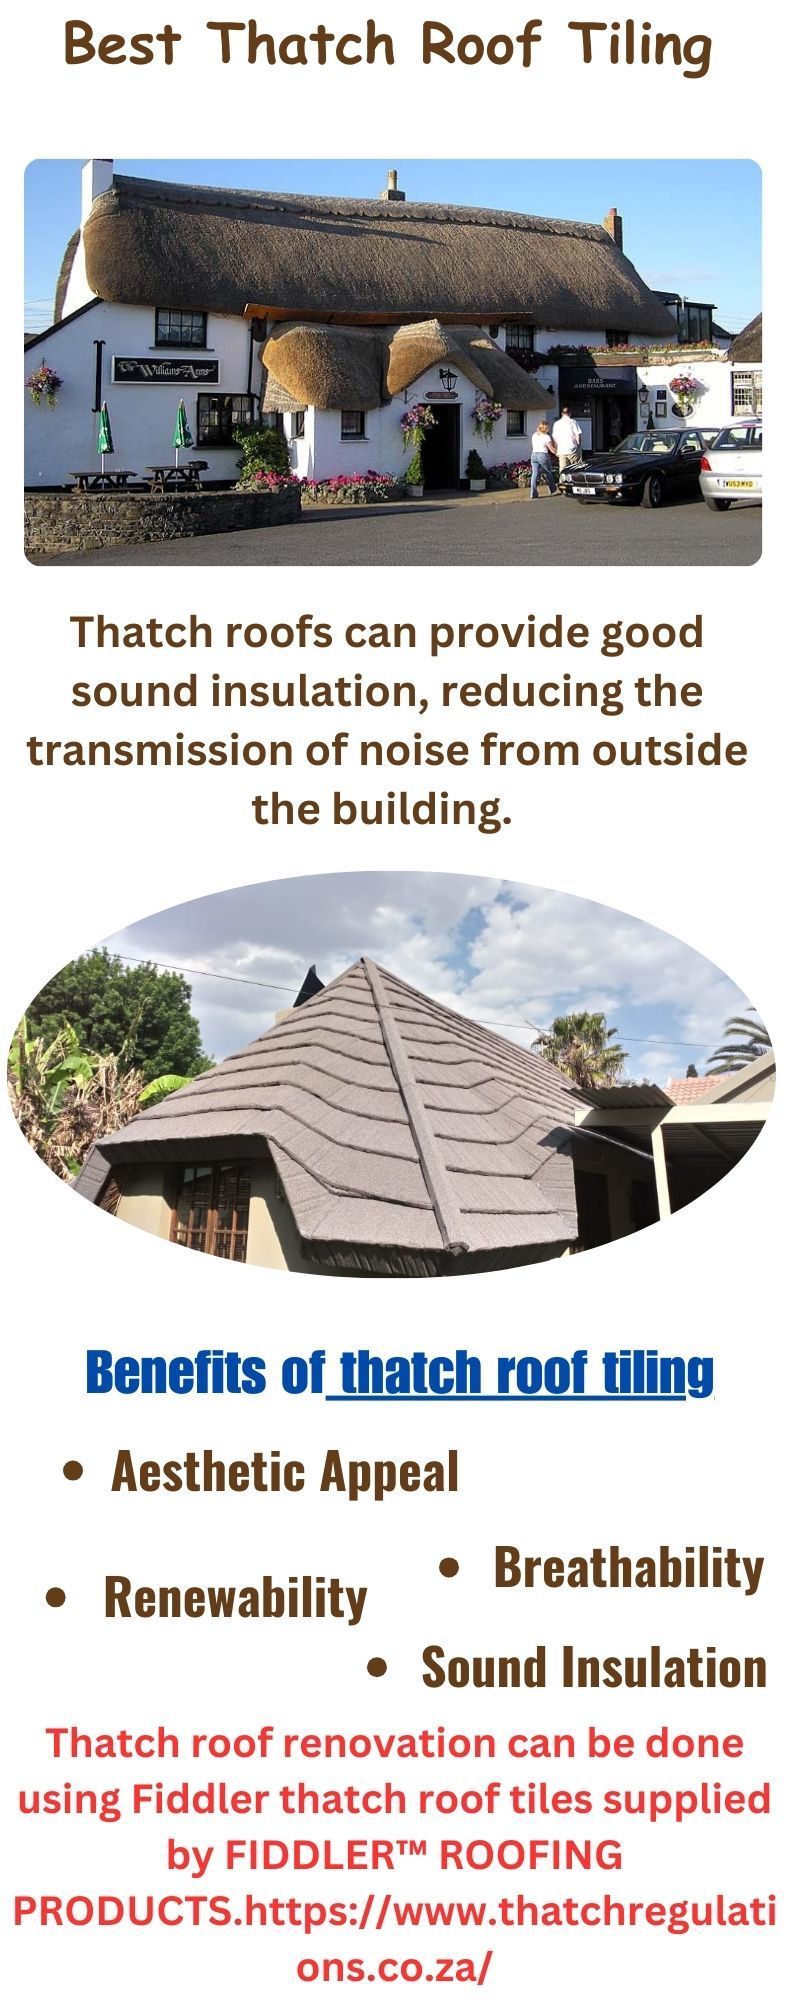 Best Thatch Roof Tiling | Thatch roof replaceme...